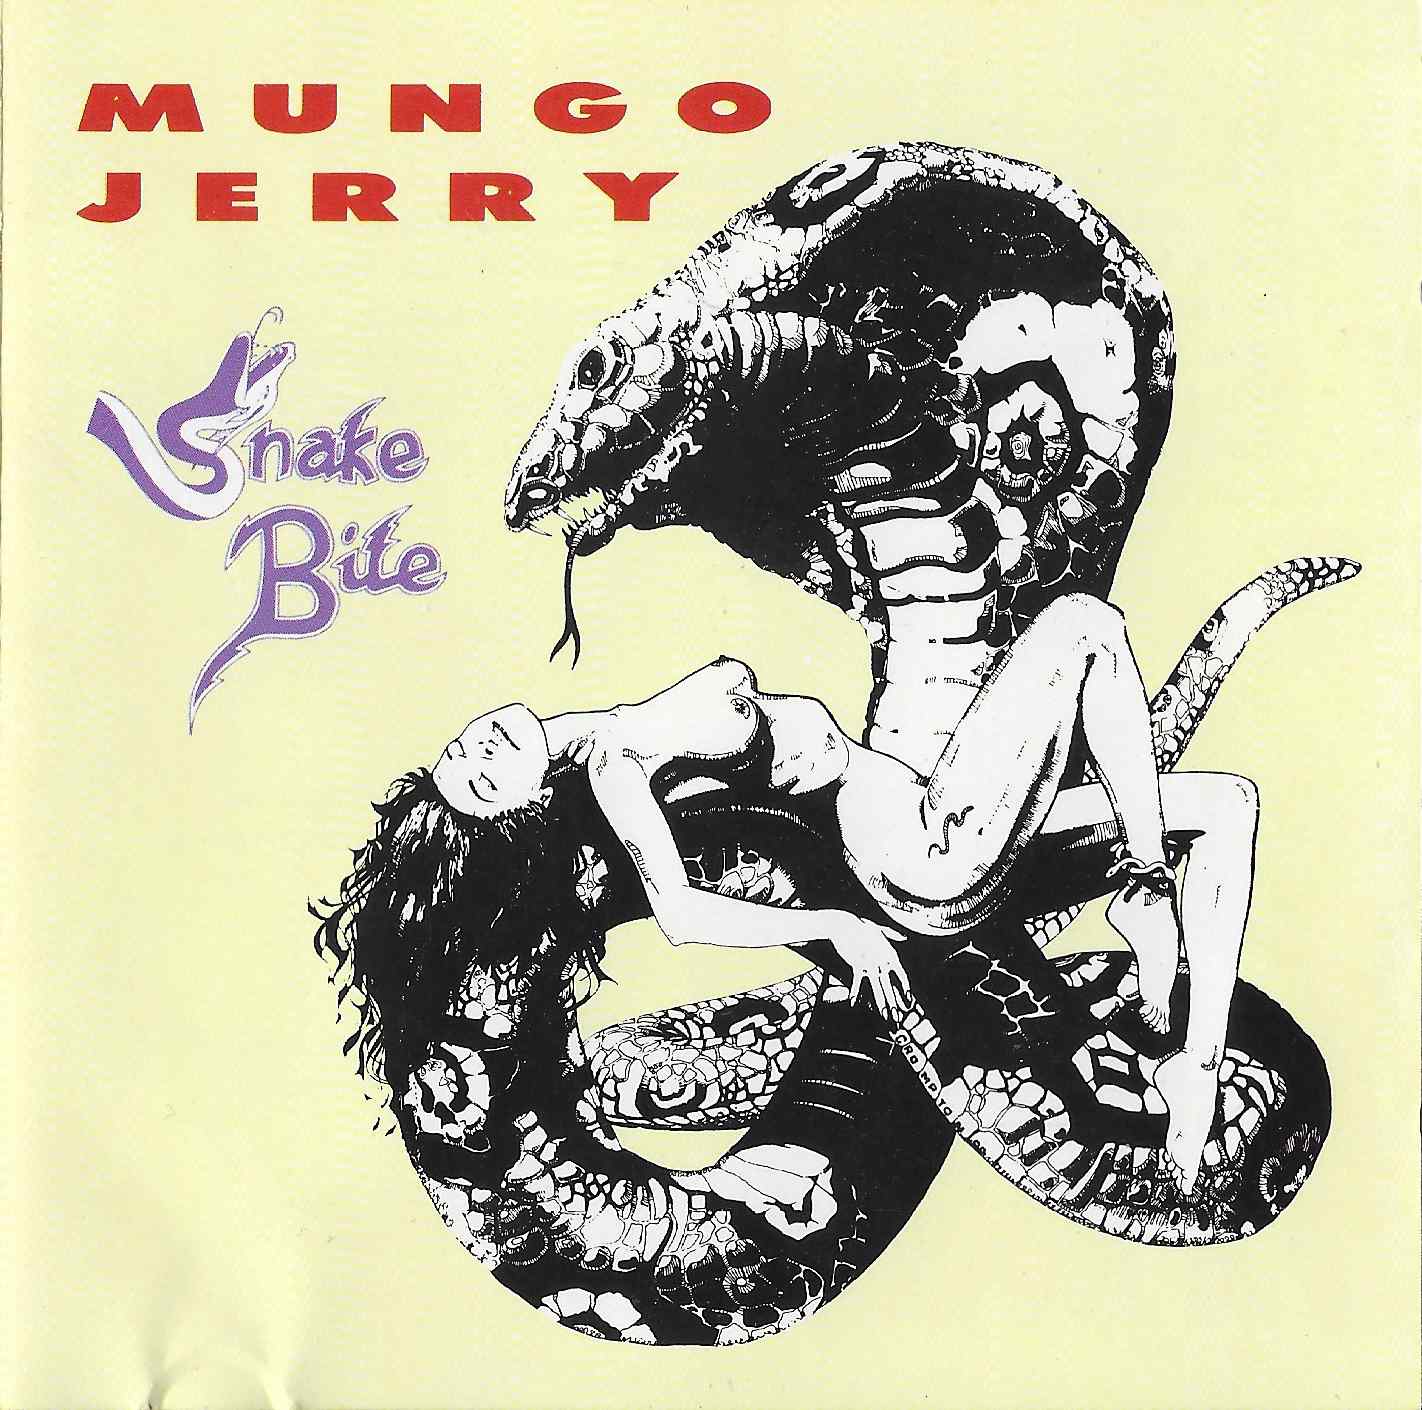 Picture of CDPC 5011 Snakebite by artist Mungo Jerry from the BBC cds - Records and Tapes library